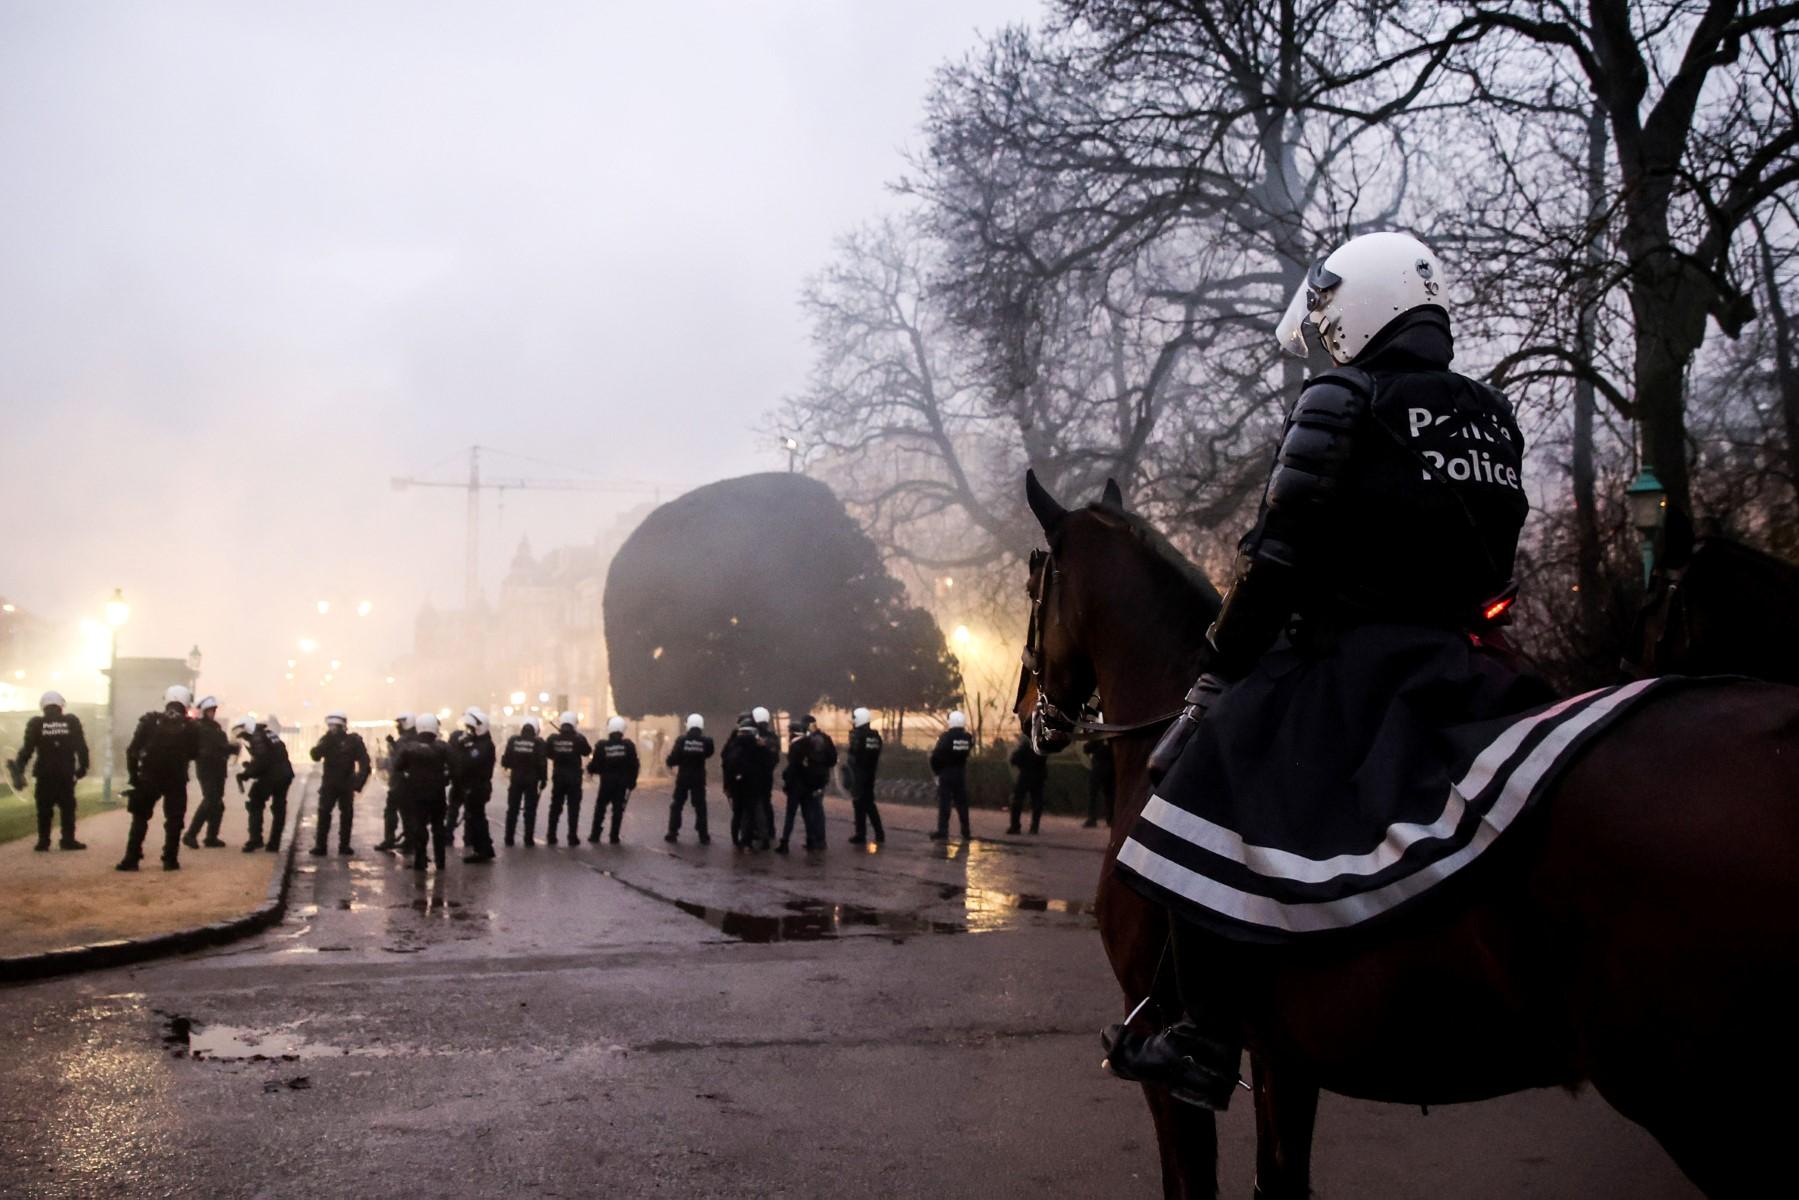 A mounted police officers looks on on his horse during a demonstration against Covid-19 vaccination in Brussels, on Dec 19, 2021. Photo: AFP